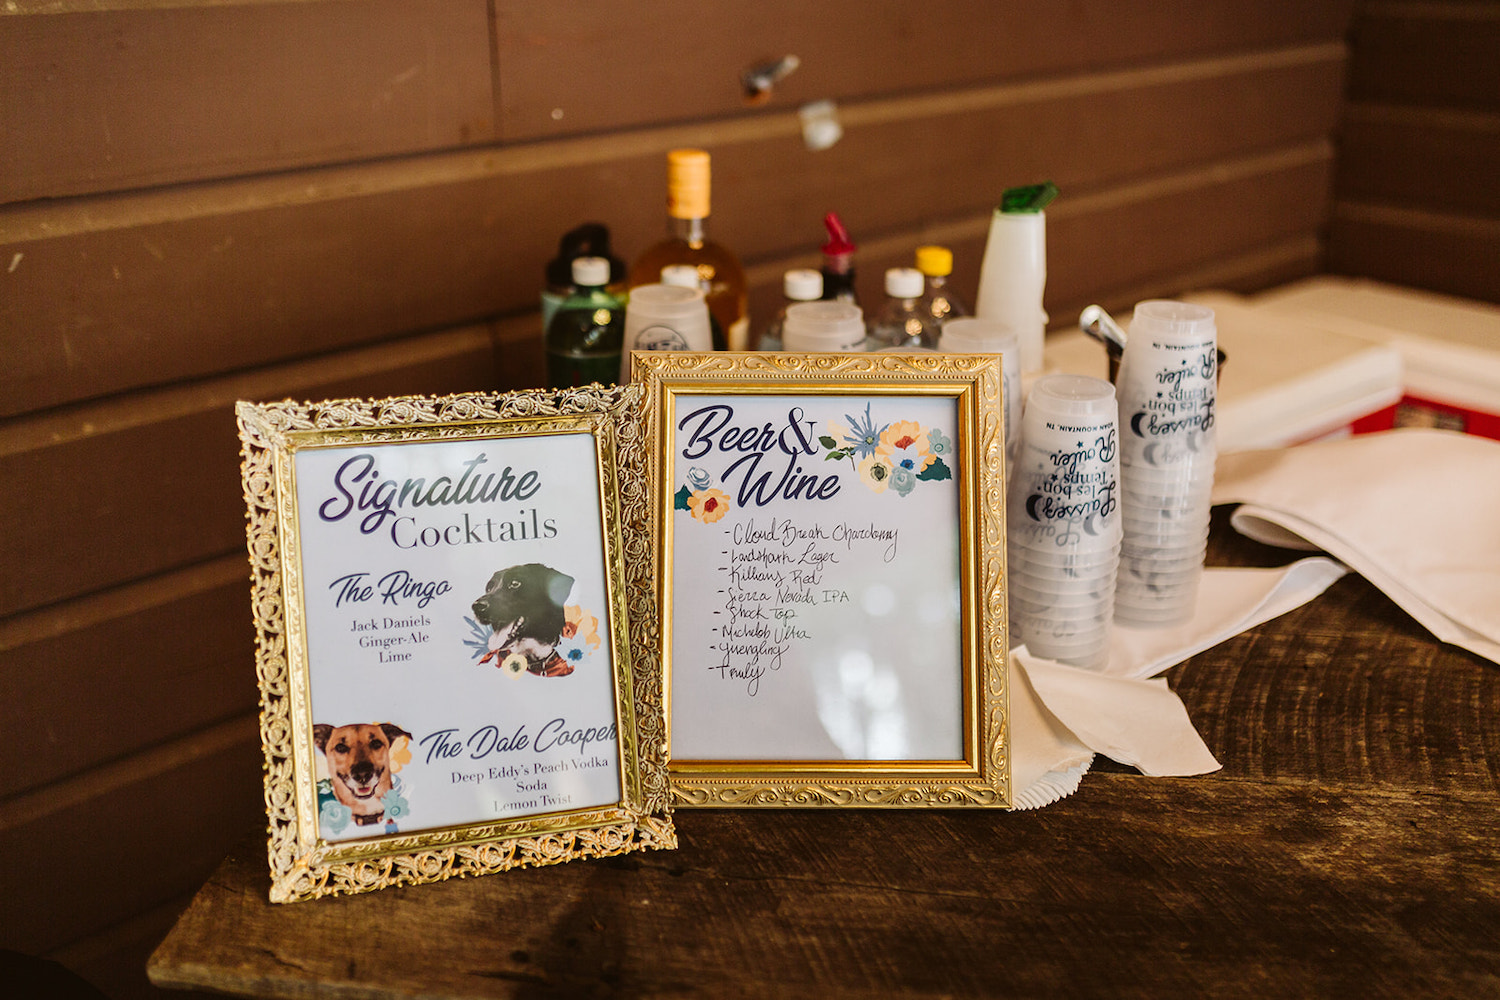 printed signs with beer and wine list and cocktails named after the couple's dogs sits in front of plastic cups